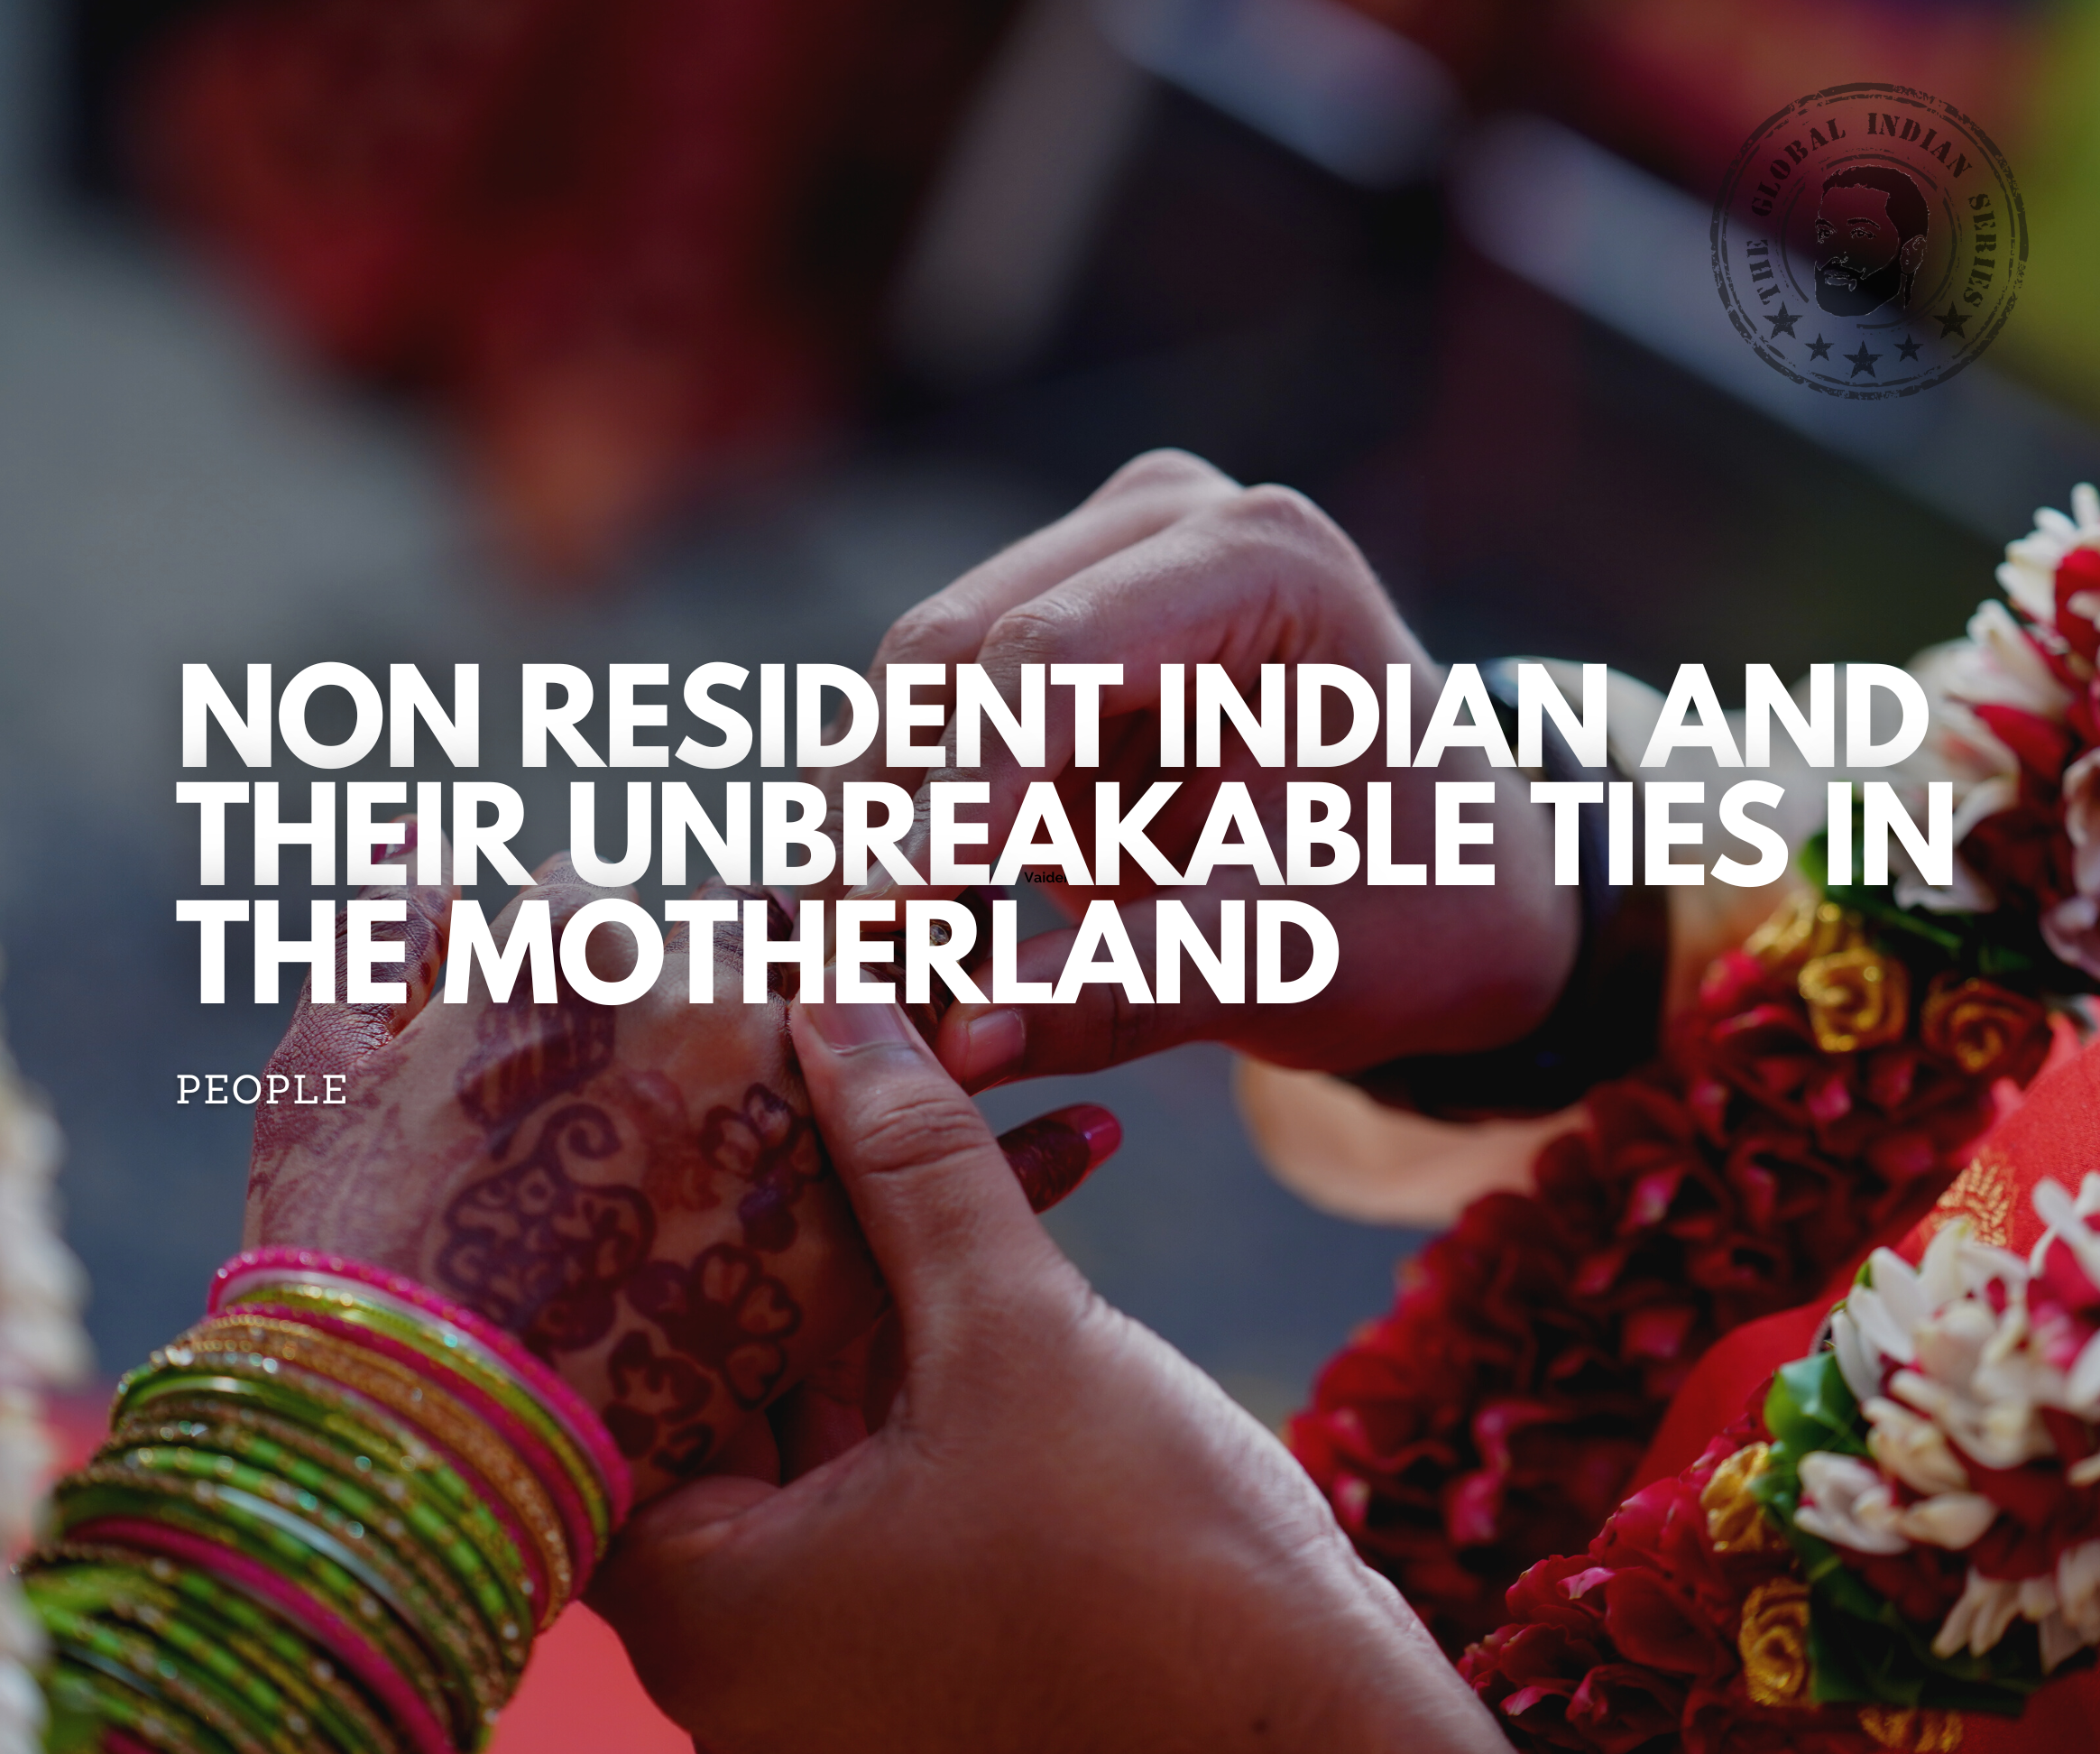 Non-Resident Indian And Thier Unbreakable Ties In Thier Motherland showcase the longingness and the unbreakable bond of immigrants .